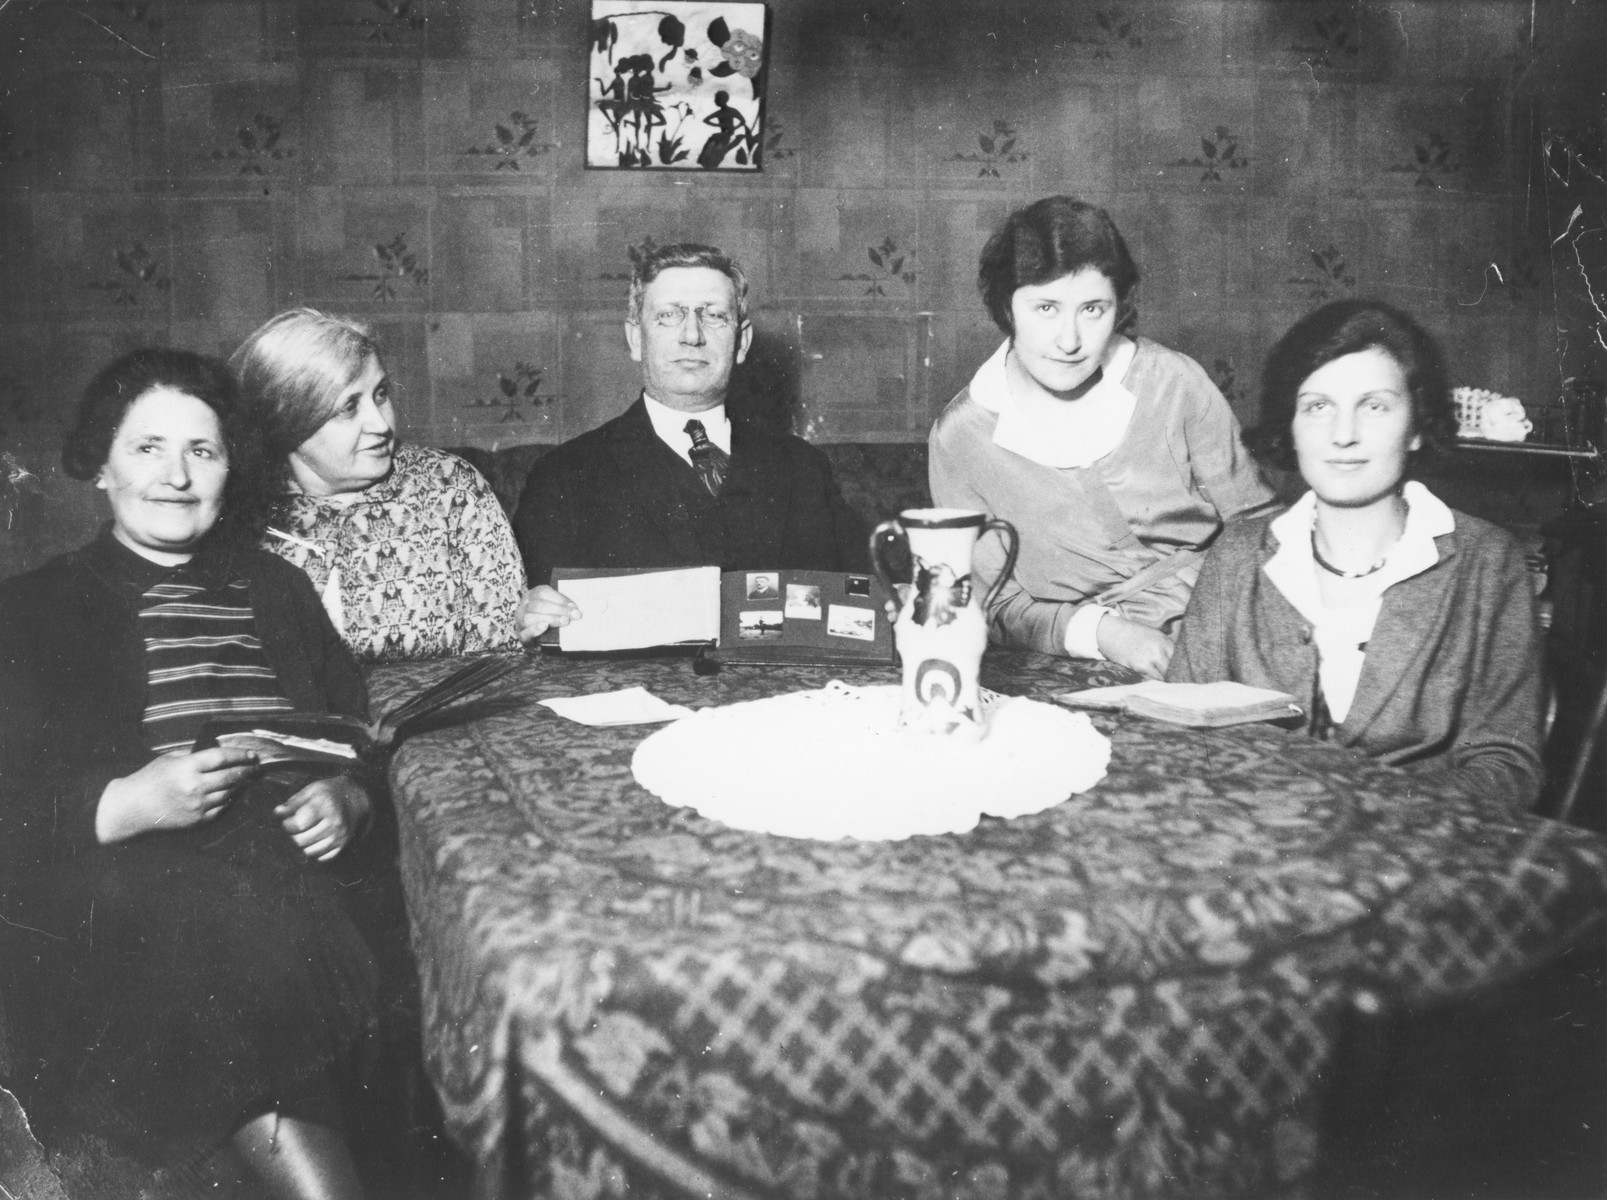 Members of the Magid family sit around their dining room table, displaying a photo album.

Pictured are Genia and Boris Magid (second and third from the left), Mania Shambadahl Olitsky and Katia Magid (right).